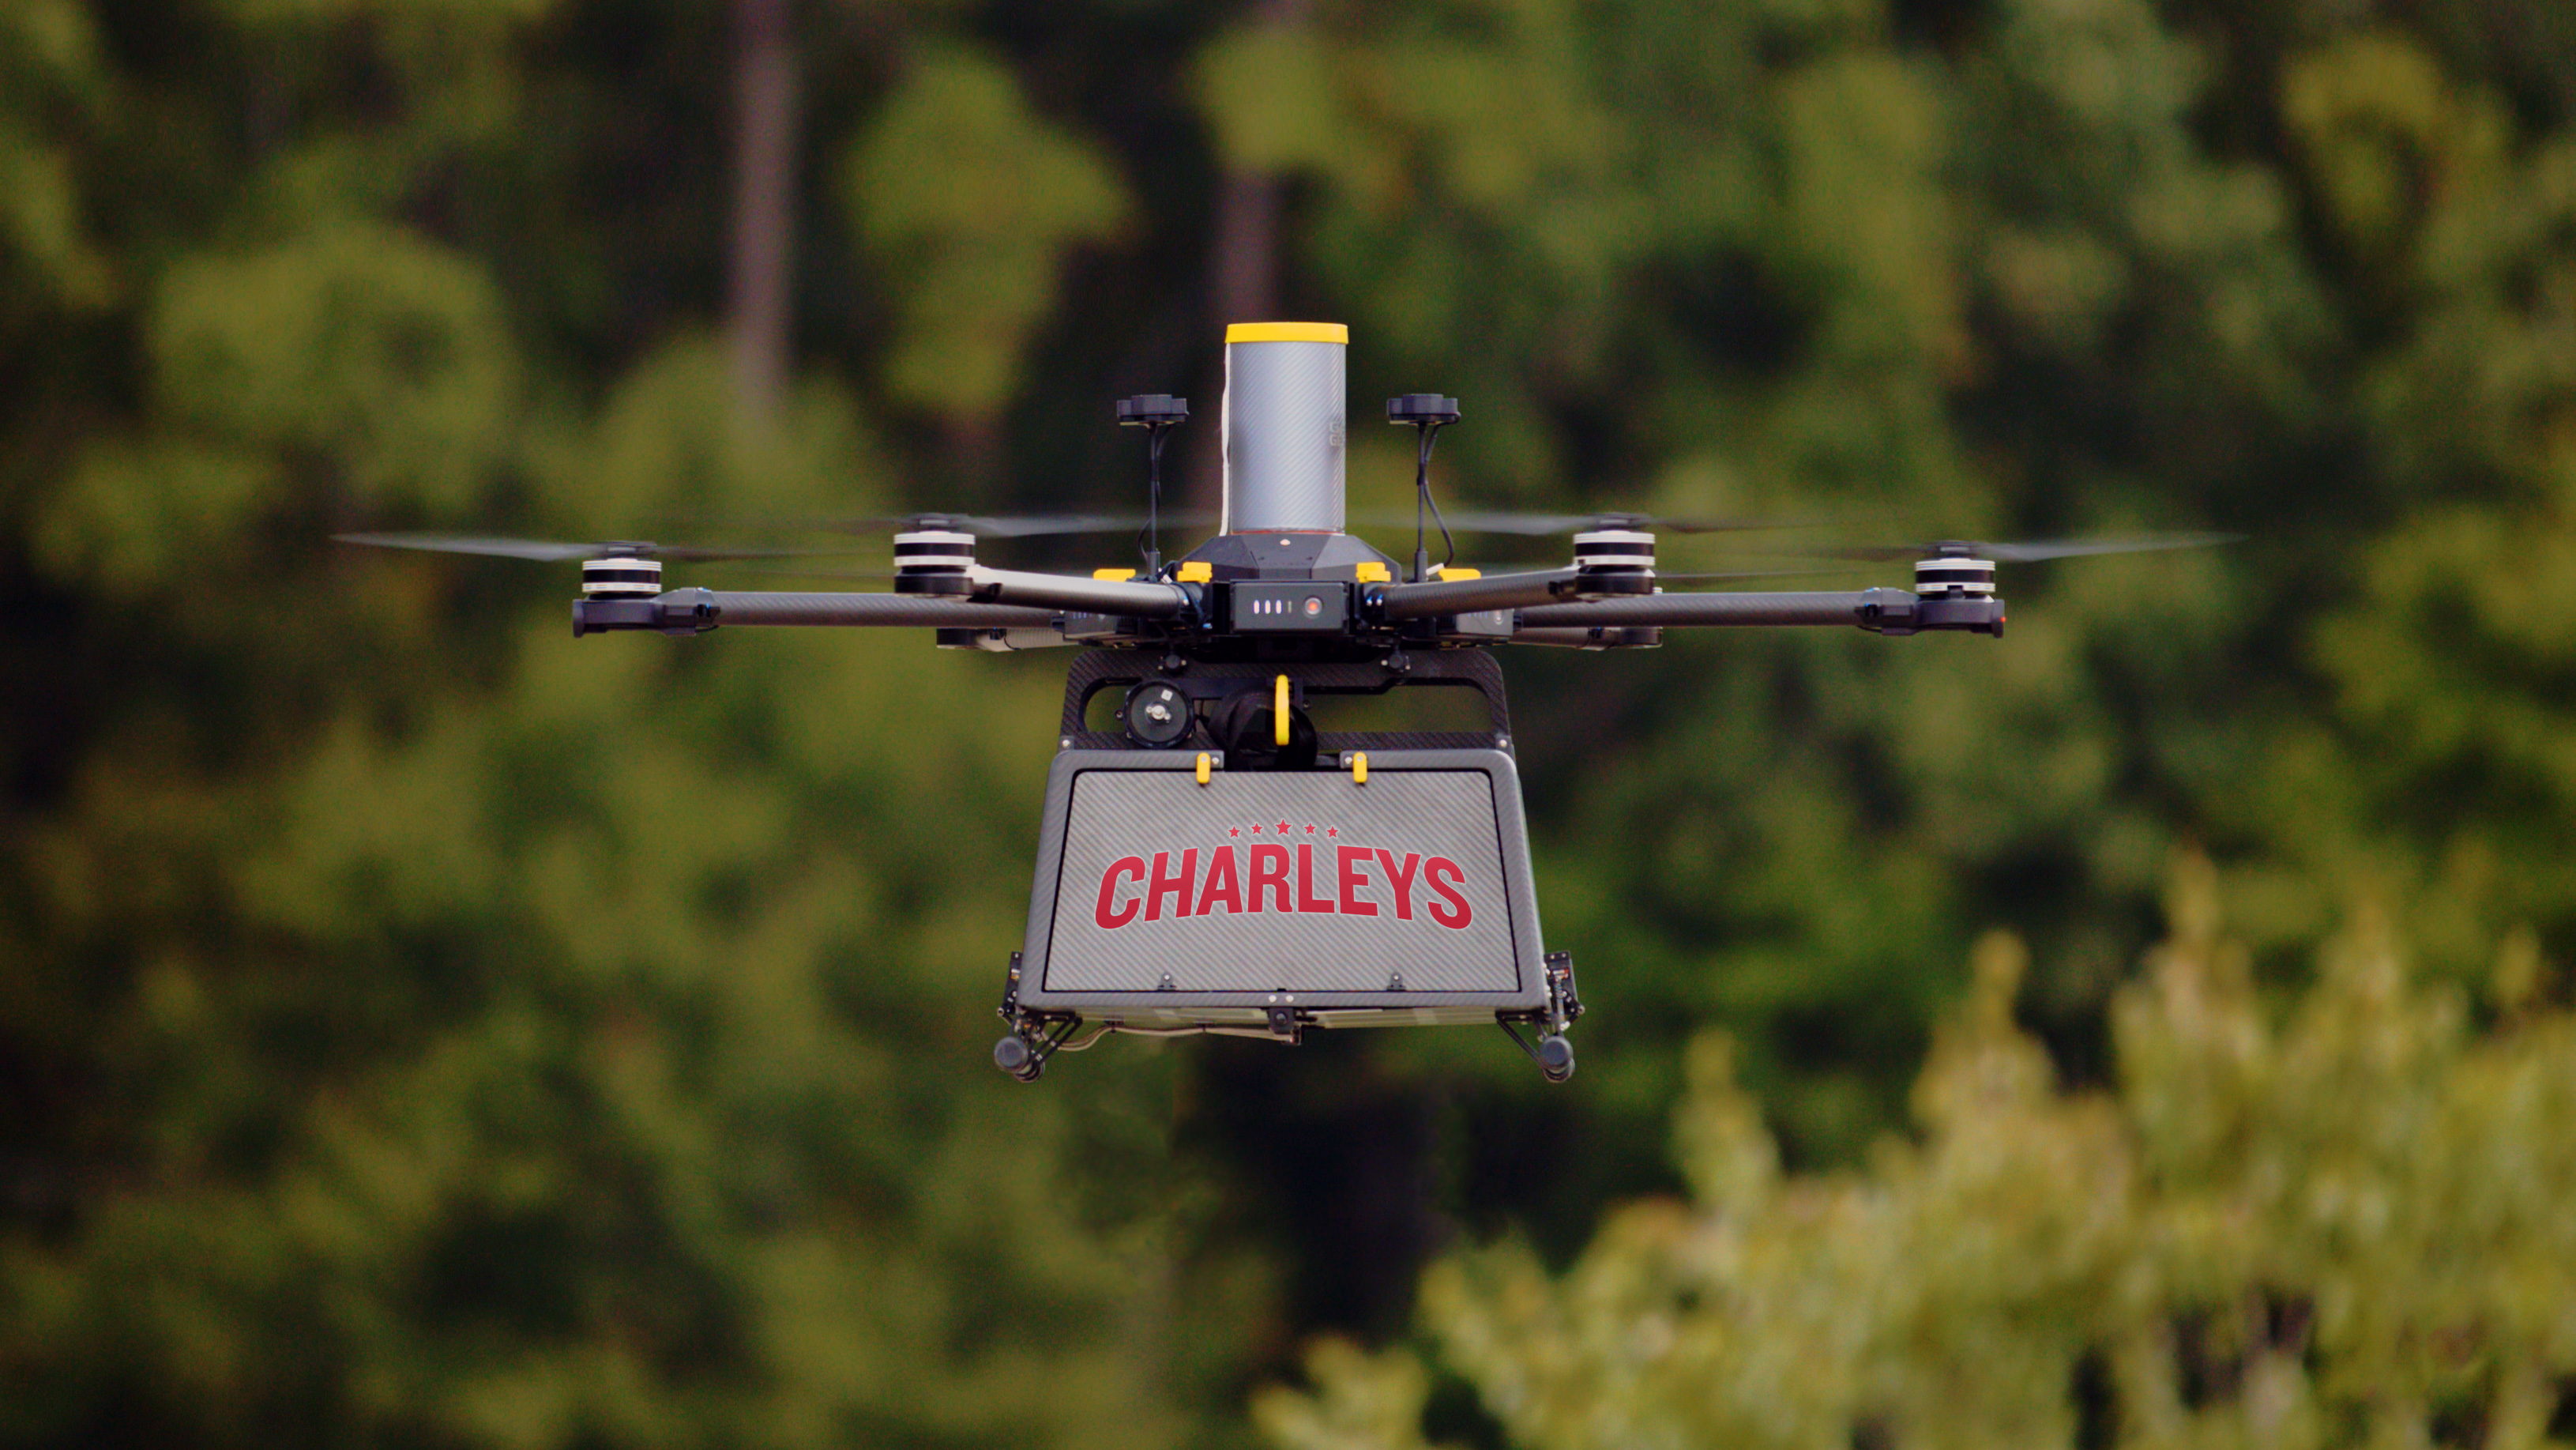 Is drone delivery taking off soon?